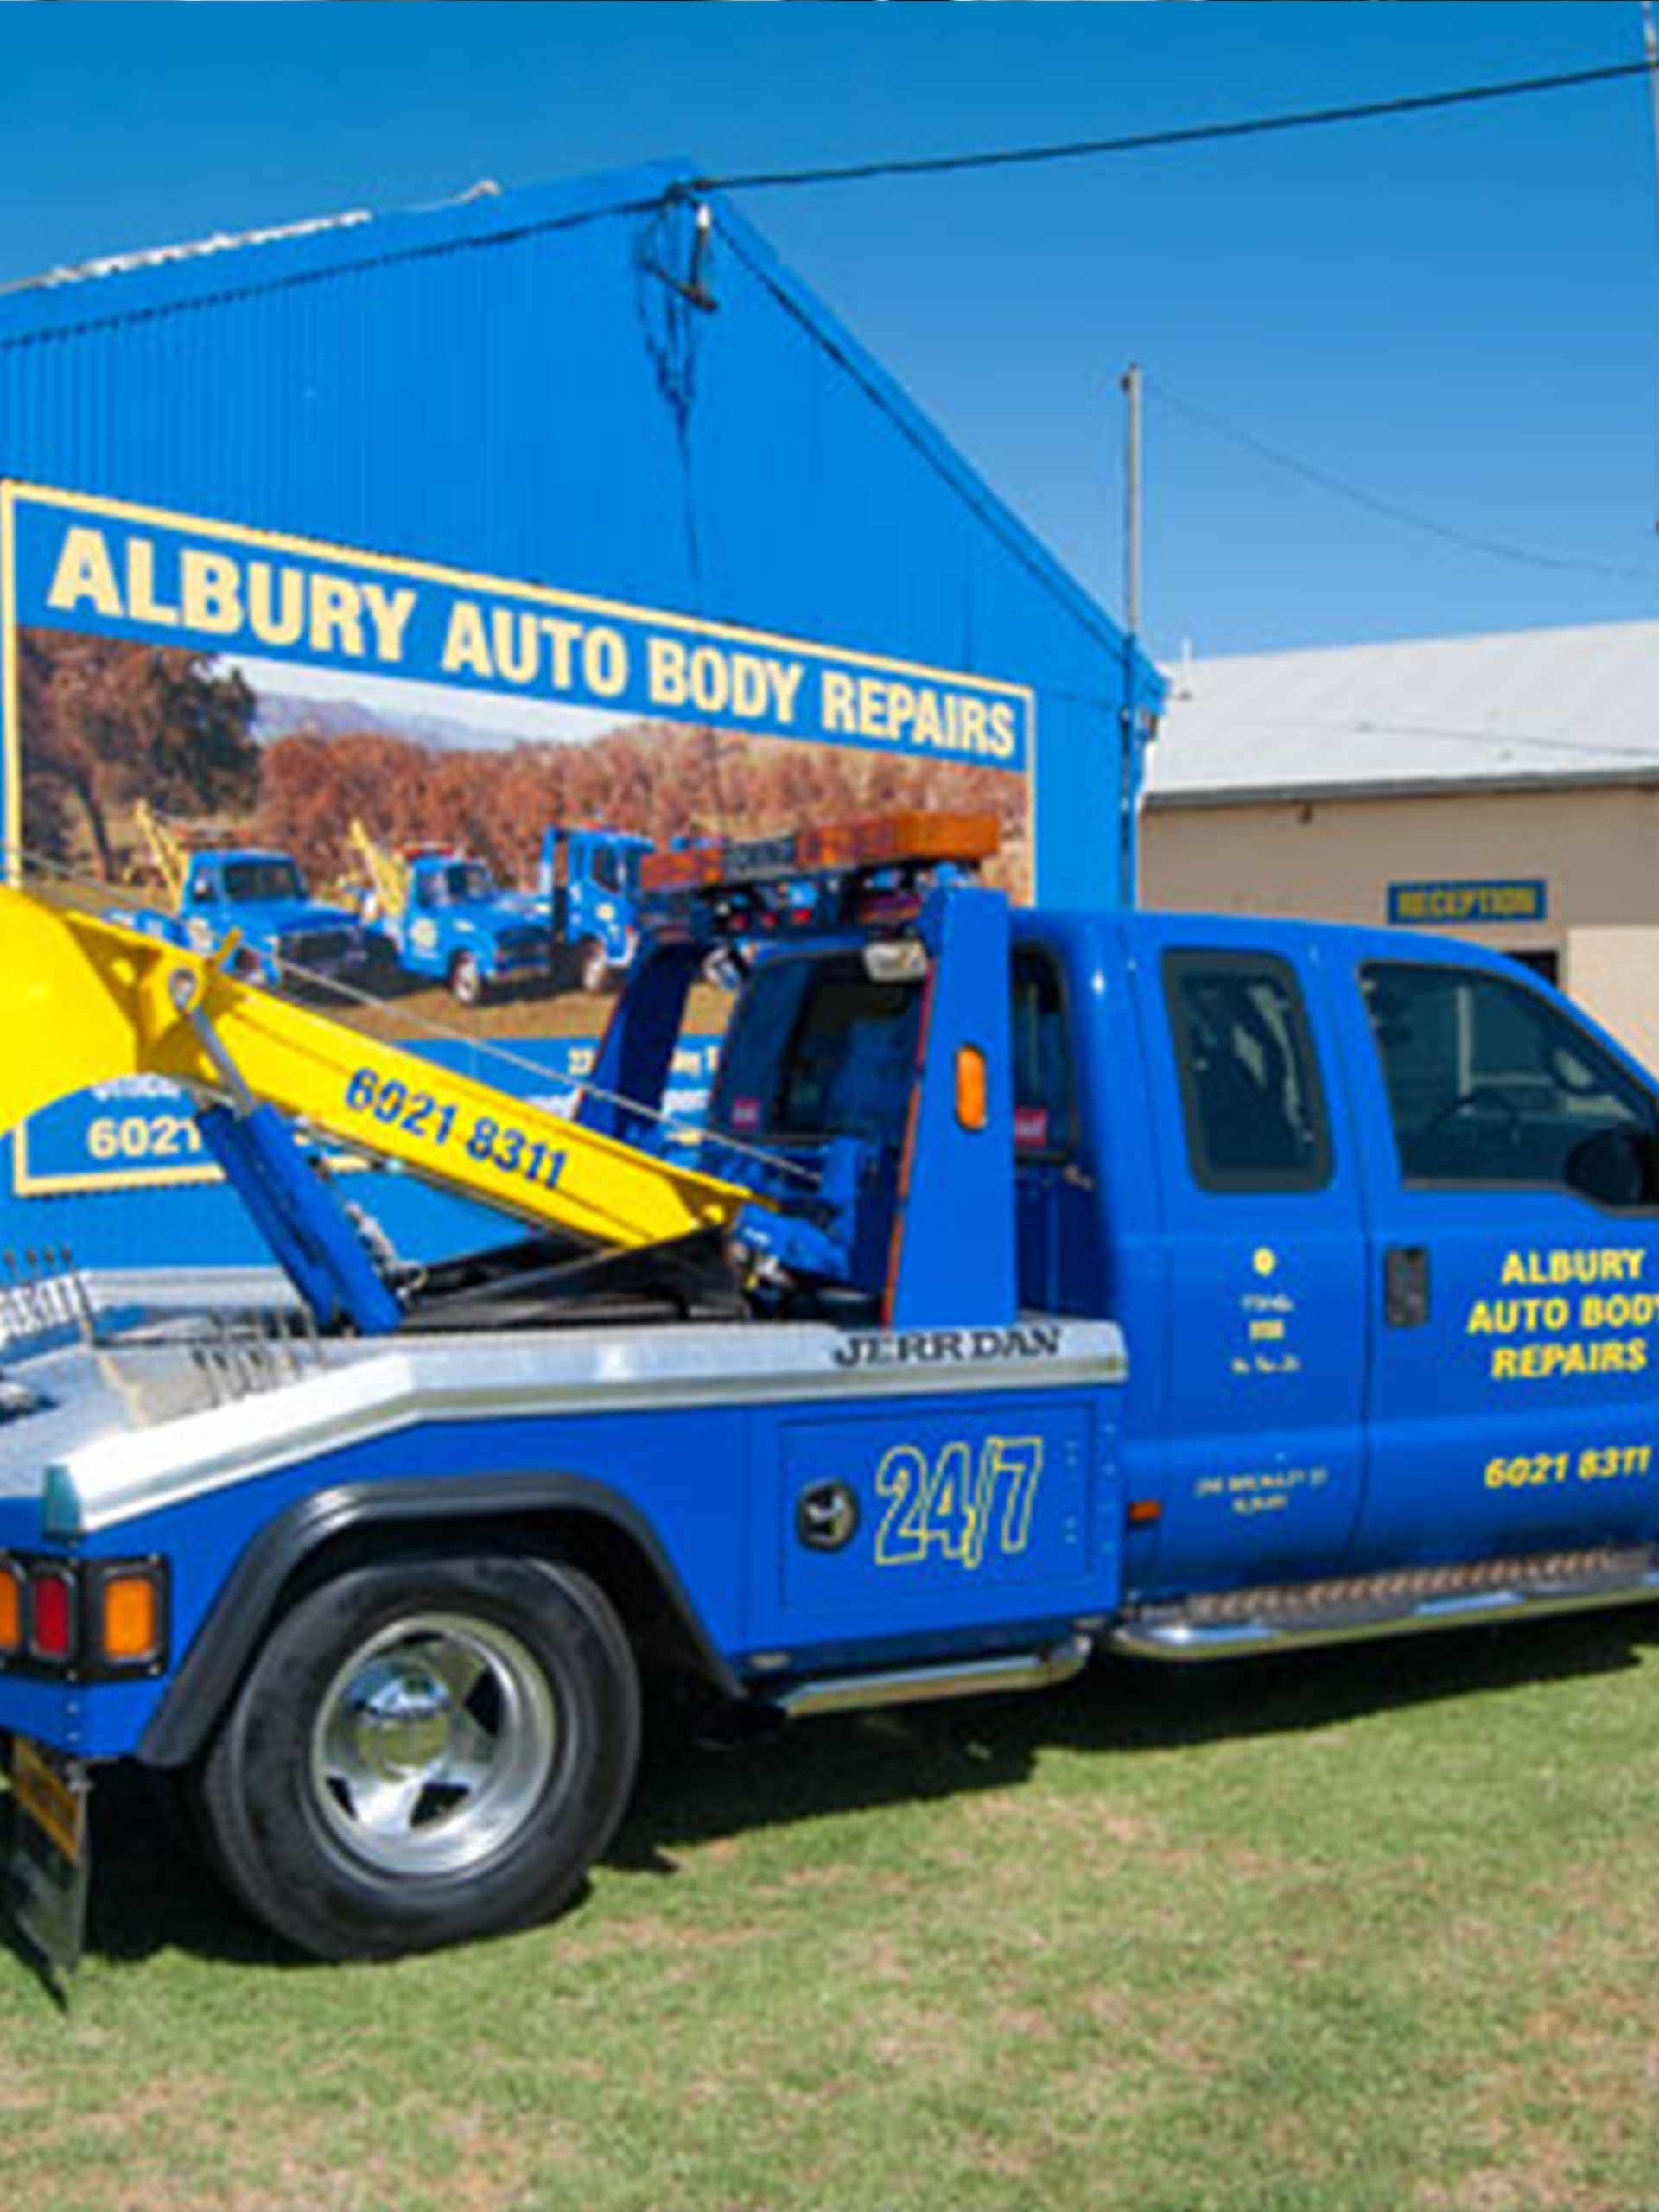 Pick-up Tow Truck — Auto Body Repairs in South Albury, NSW